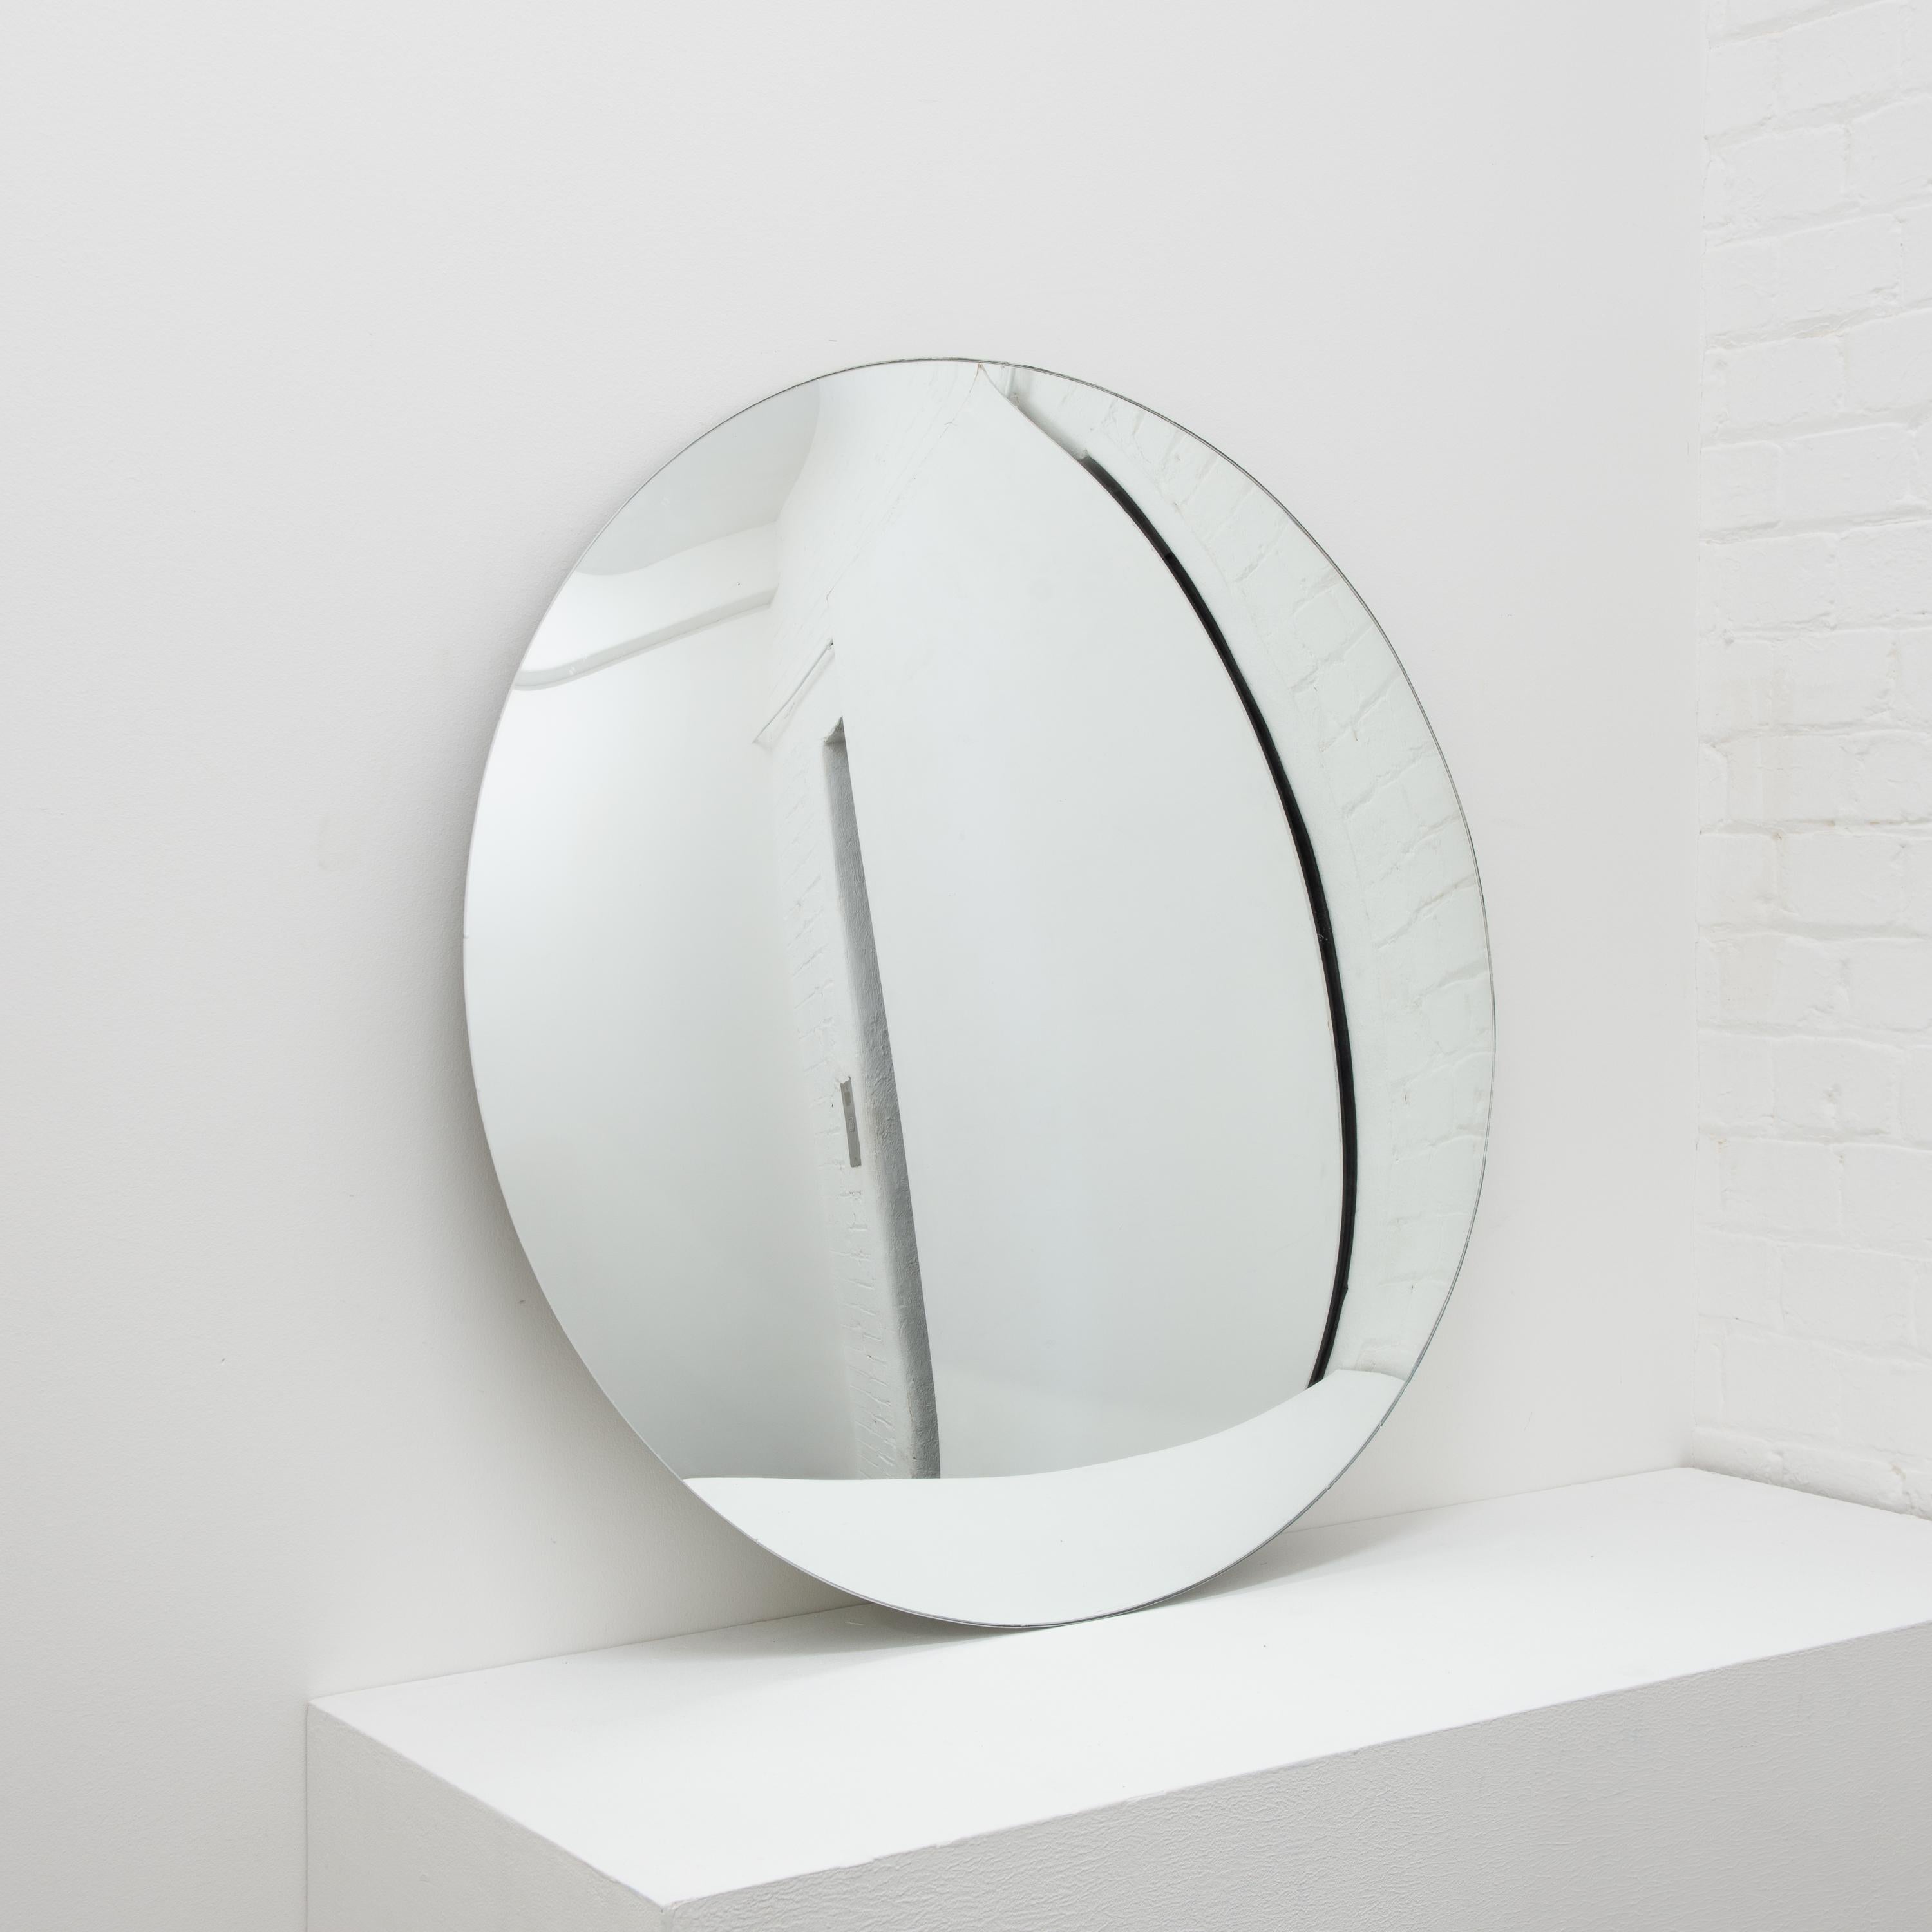 Each Orbis™ convex mirror is designed and handcrafted in London, UK. Slight variations in sizes and imperfections on edges and surface finishes are characteristics of such original handmade creations. These characteristics enhance the beauty of the